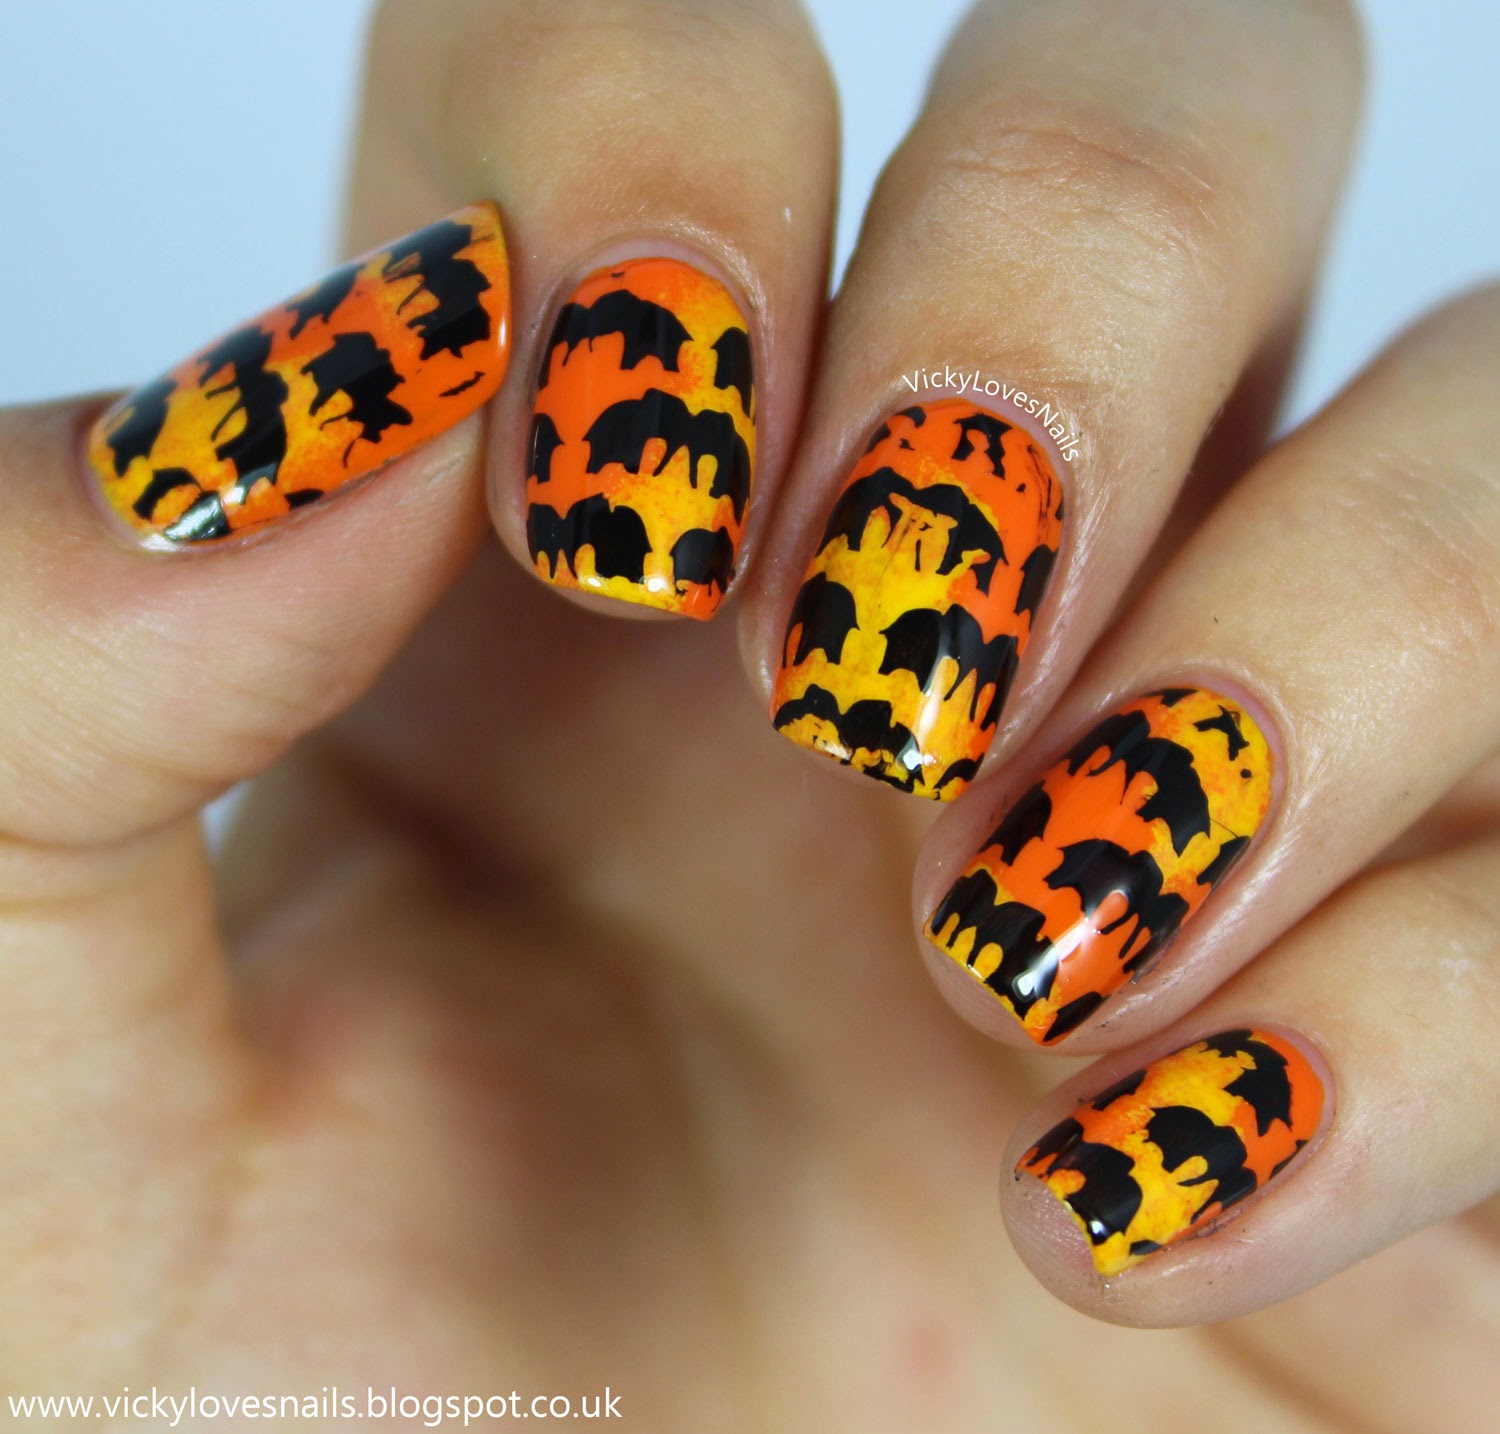 Vicky Loves Nails!: MoYou Nails Review - Plate 125